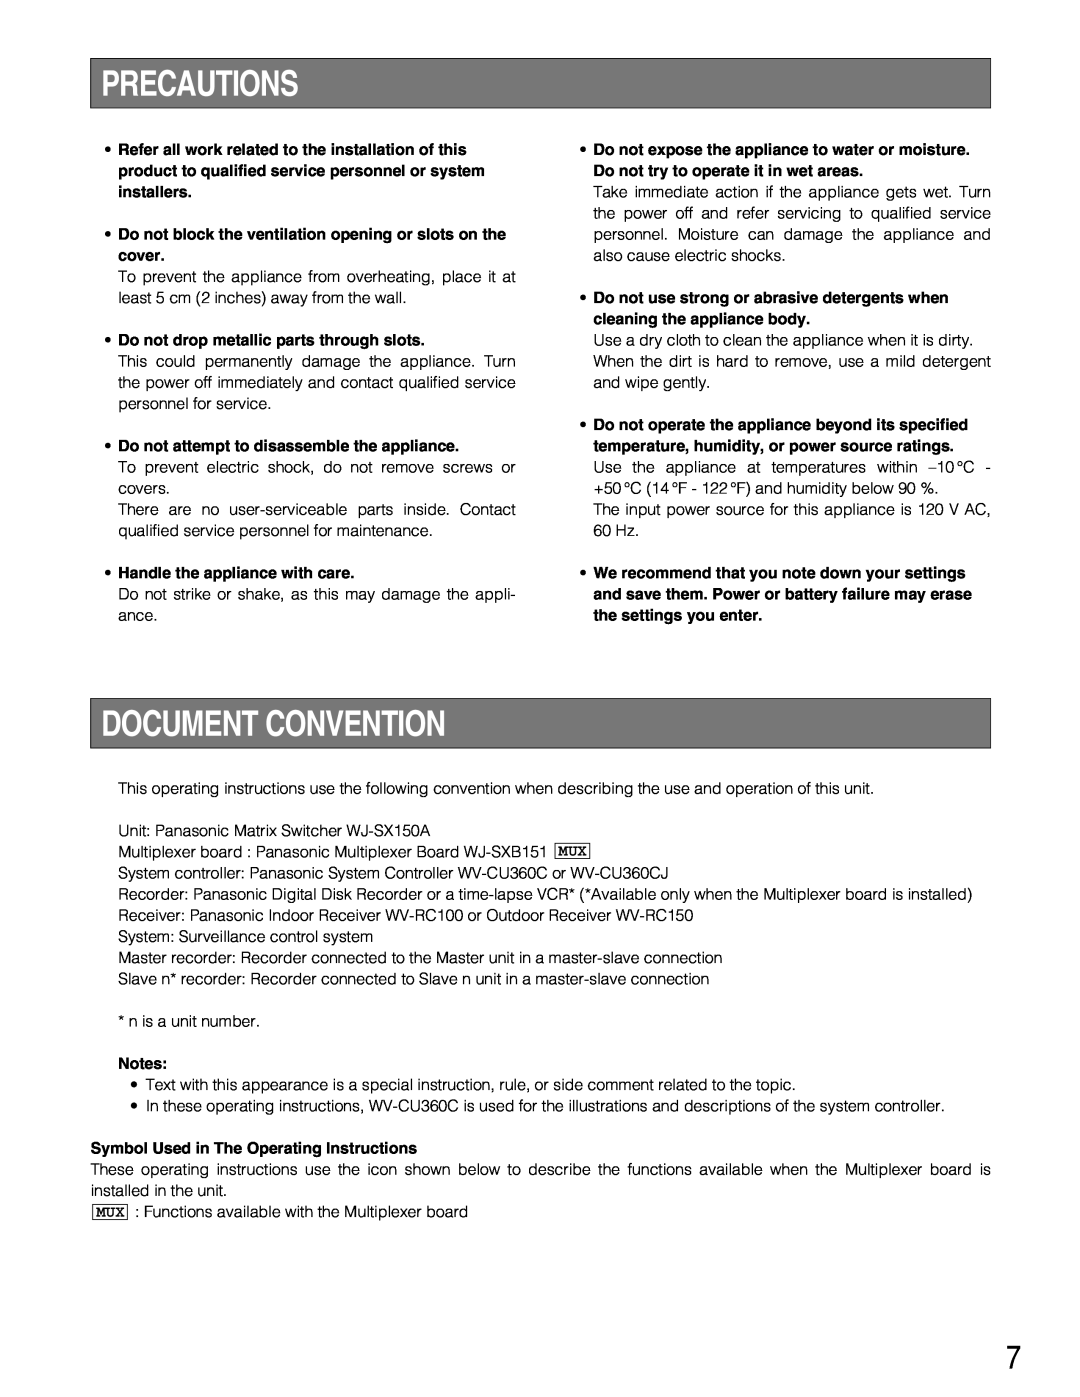 Panasonic WJ-SX150A manual Precautions, Document Convention, Do not block the ventilation opening or slots on the cover 